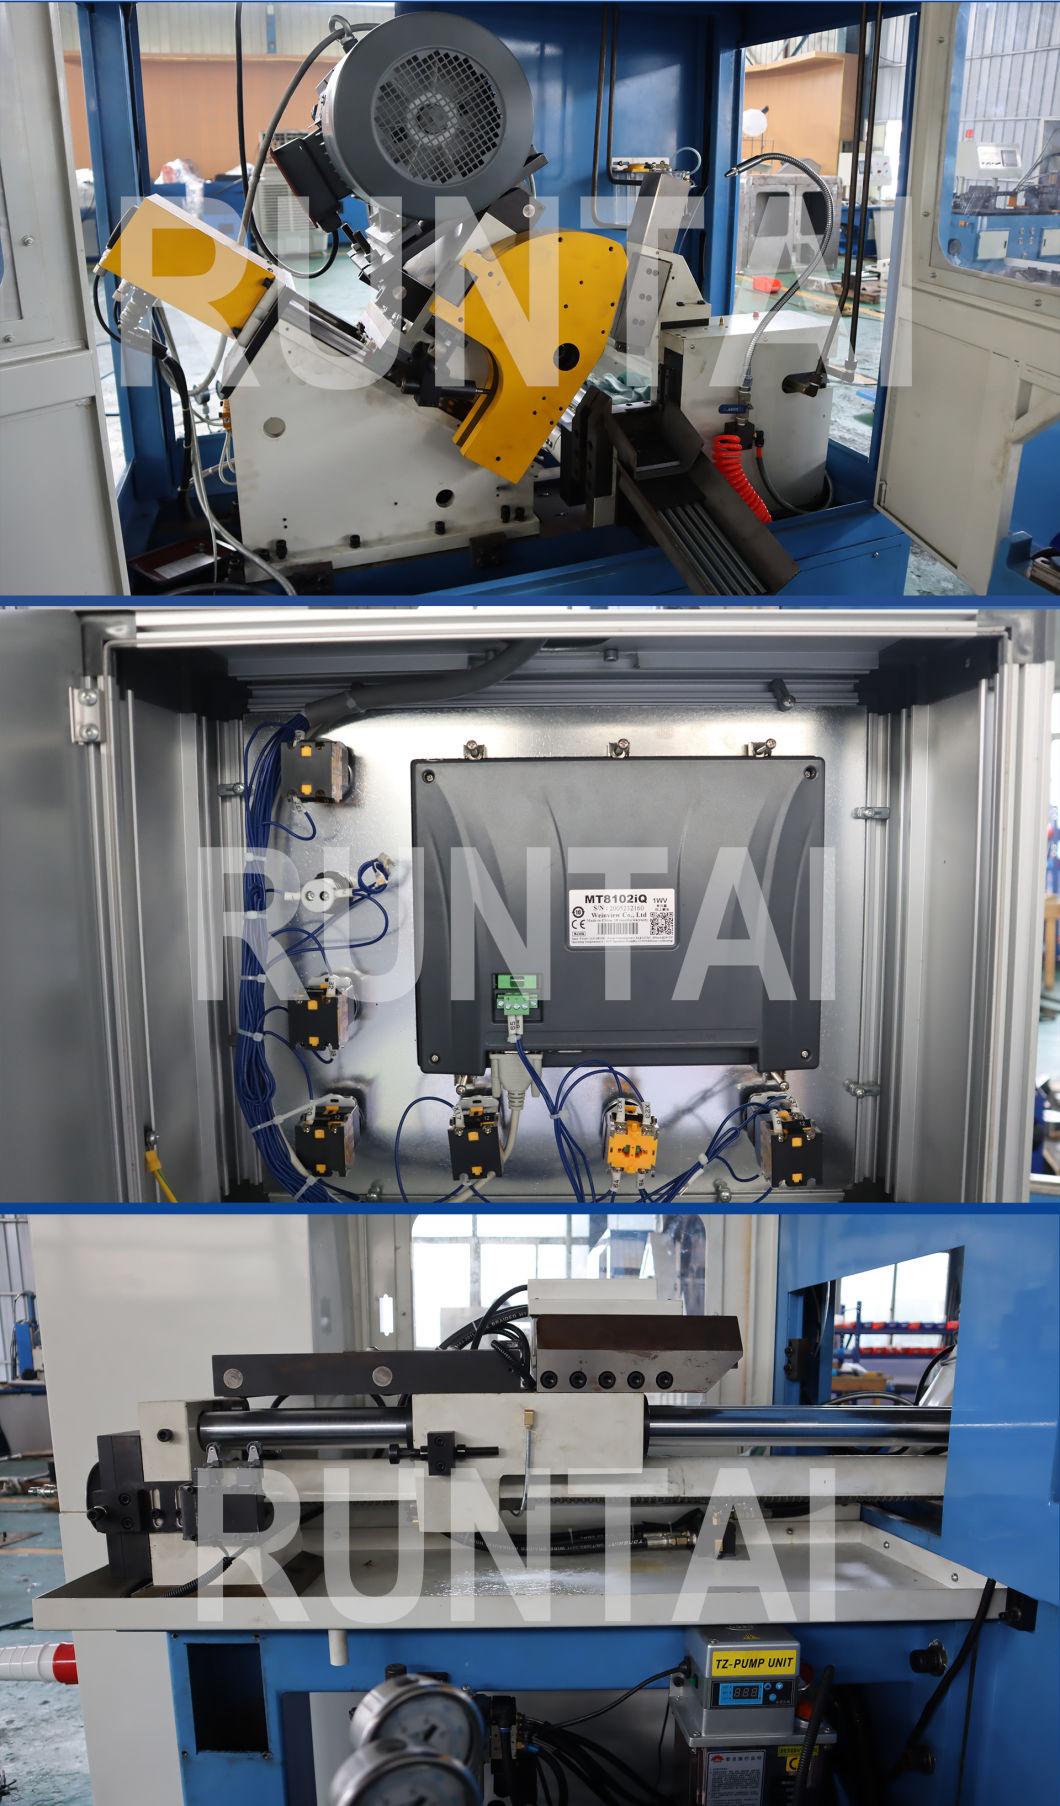 Rt-120cx Upper and Down Clamping Metal Tube Cutting Machine Price CNC